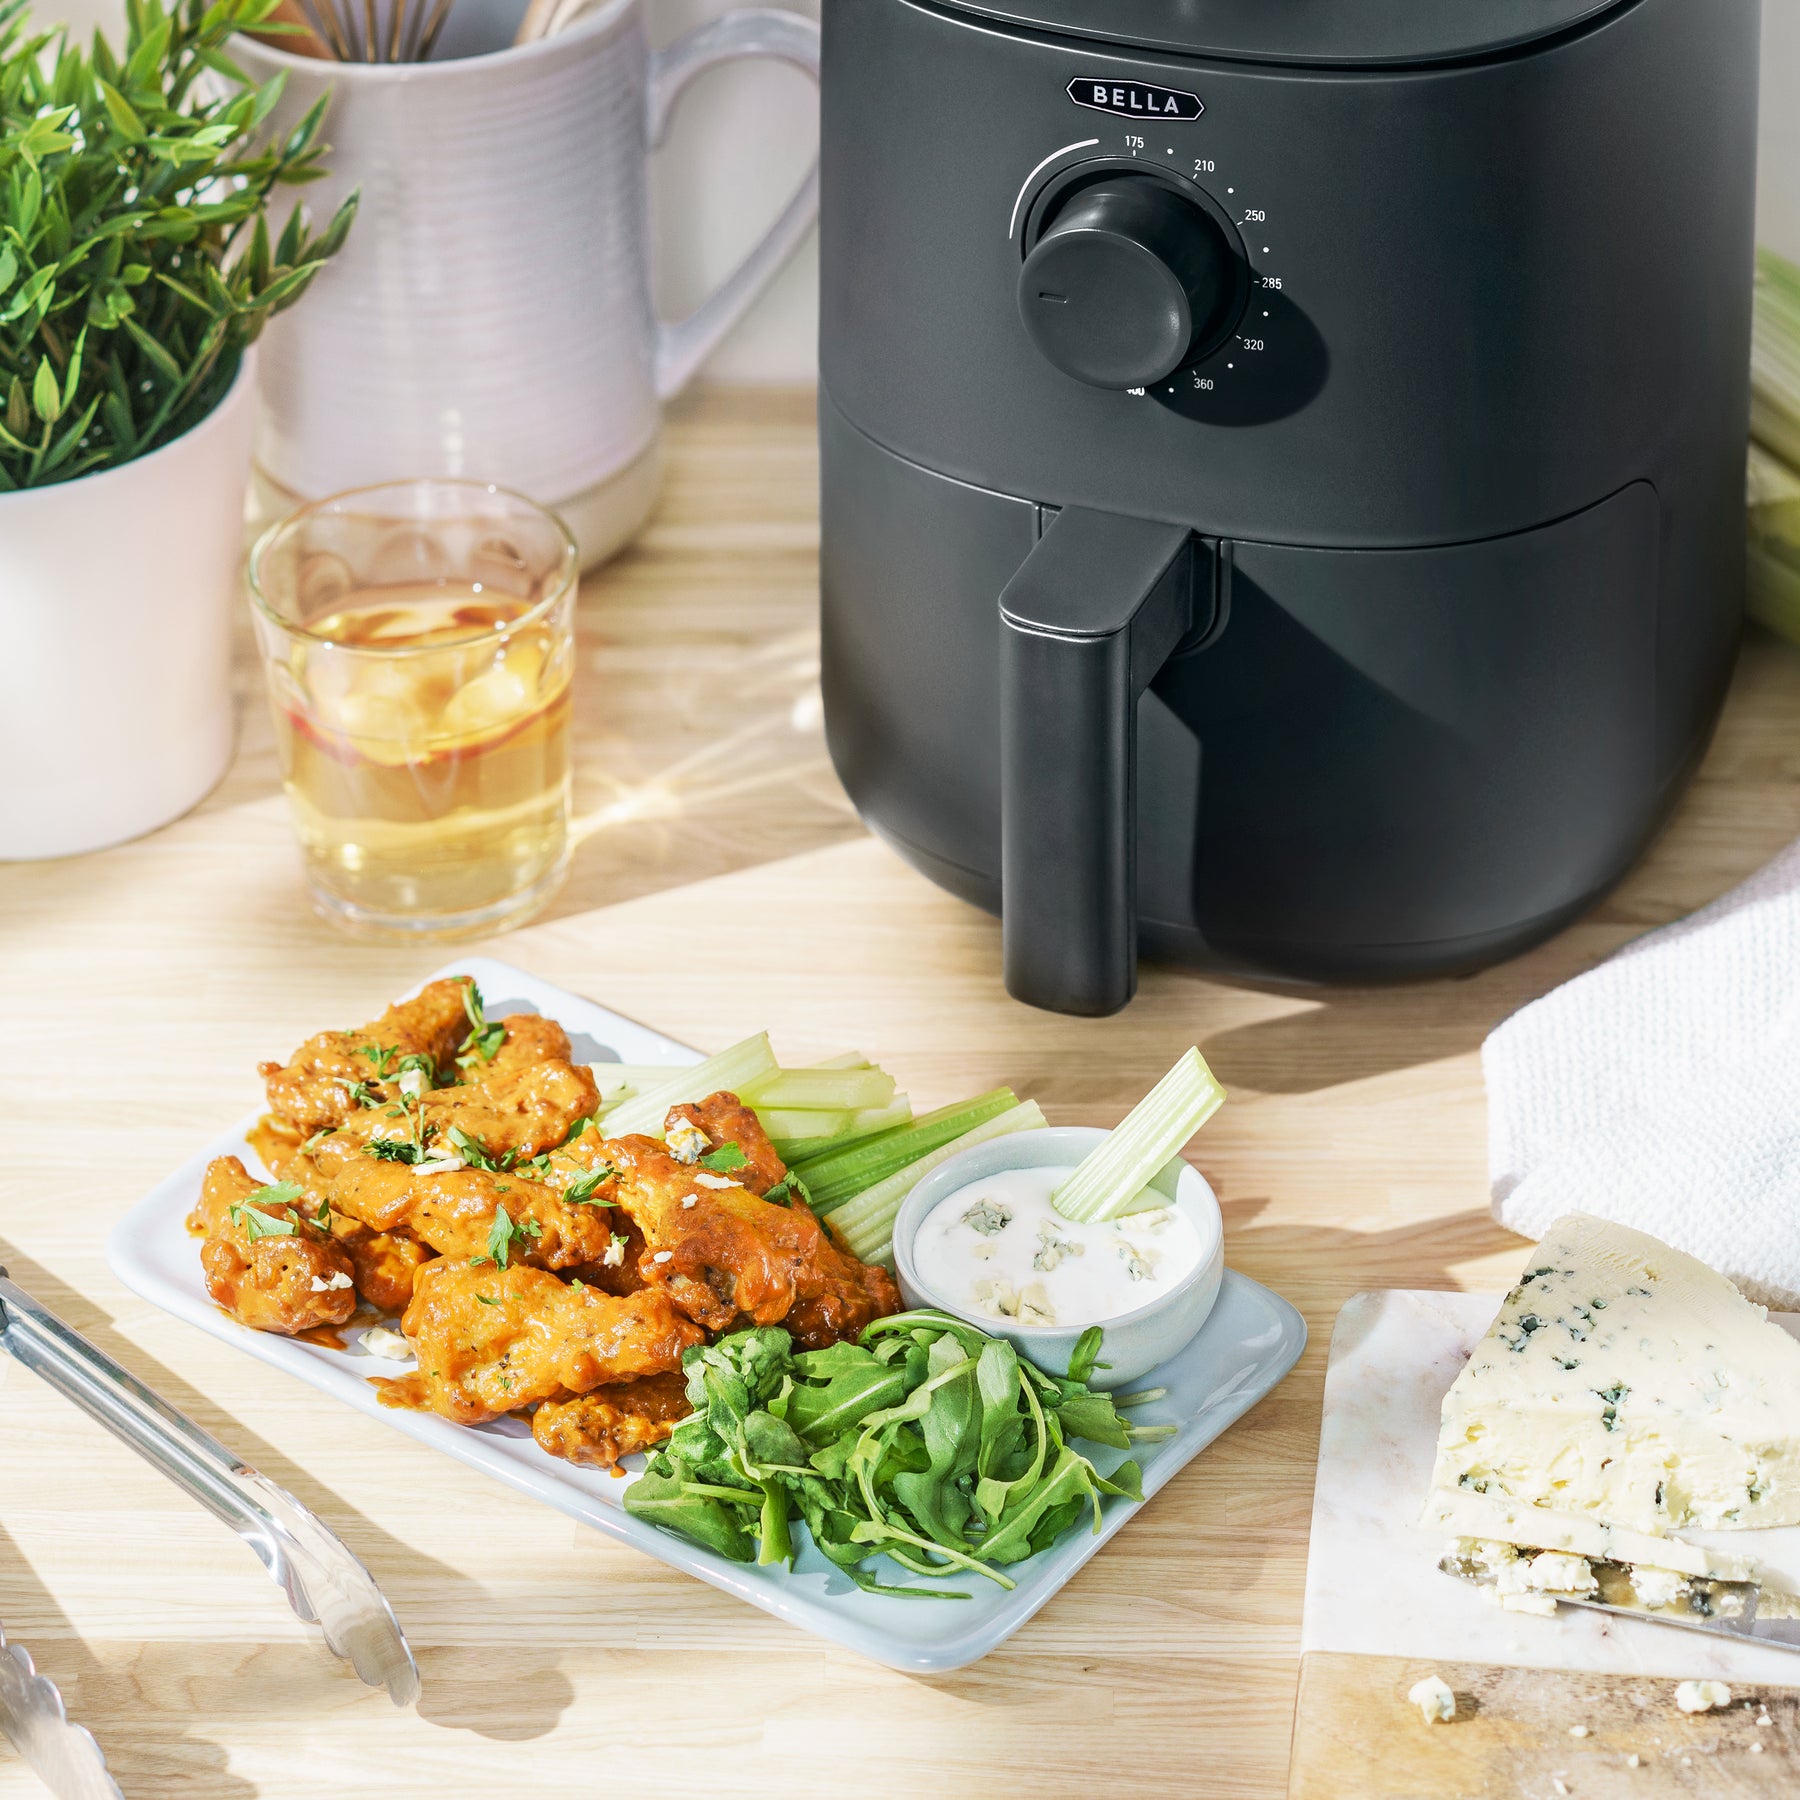 Bella Pro Series 90174 Air Fryer Review - Consumer Reports